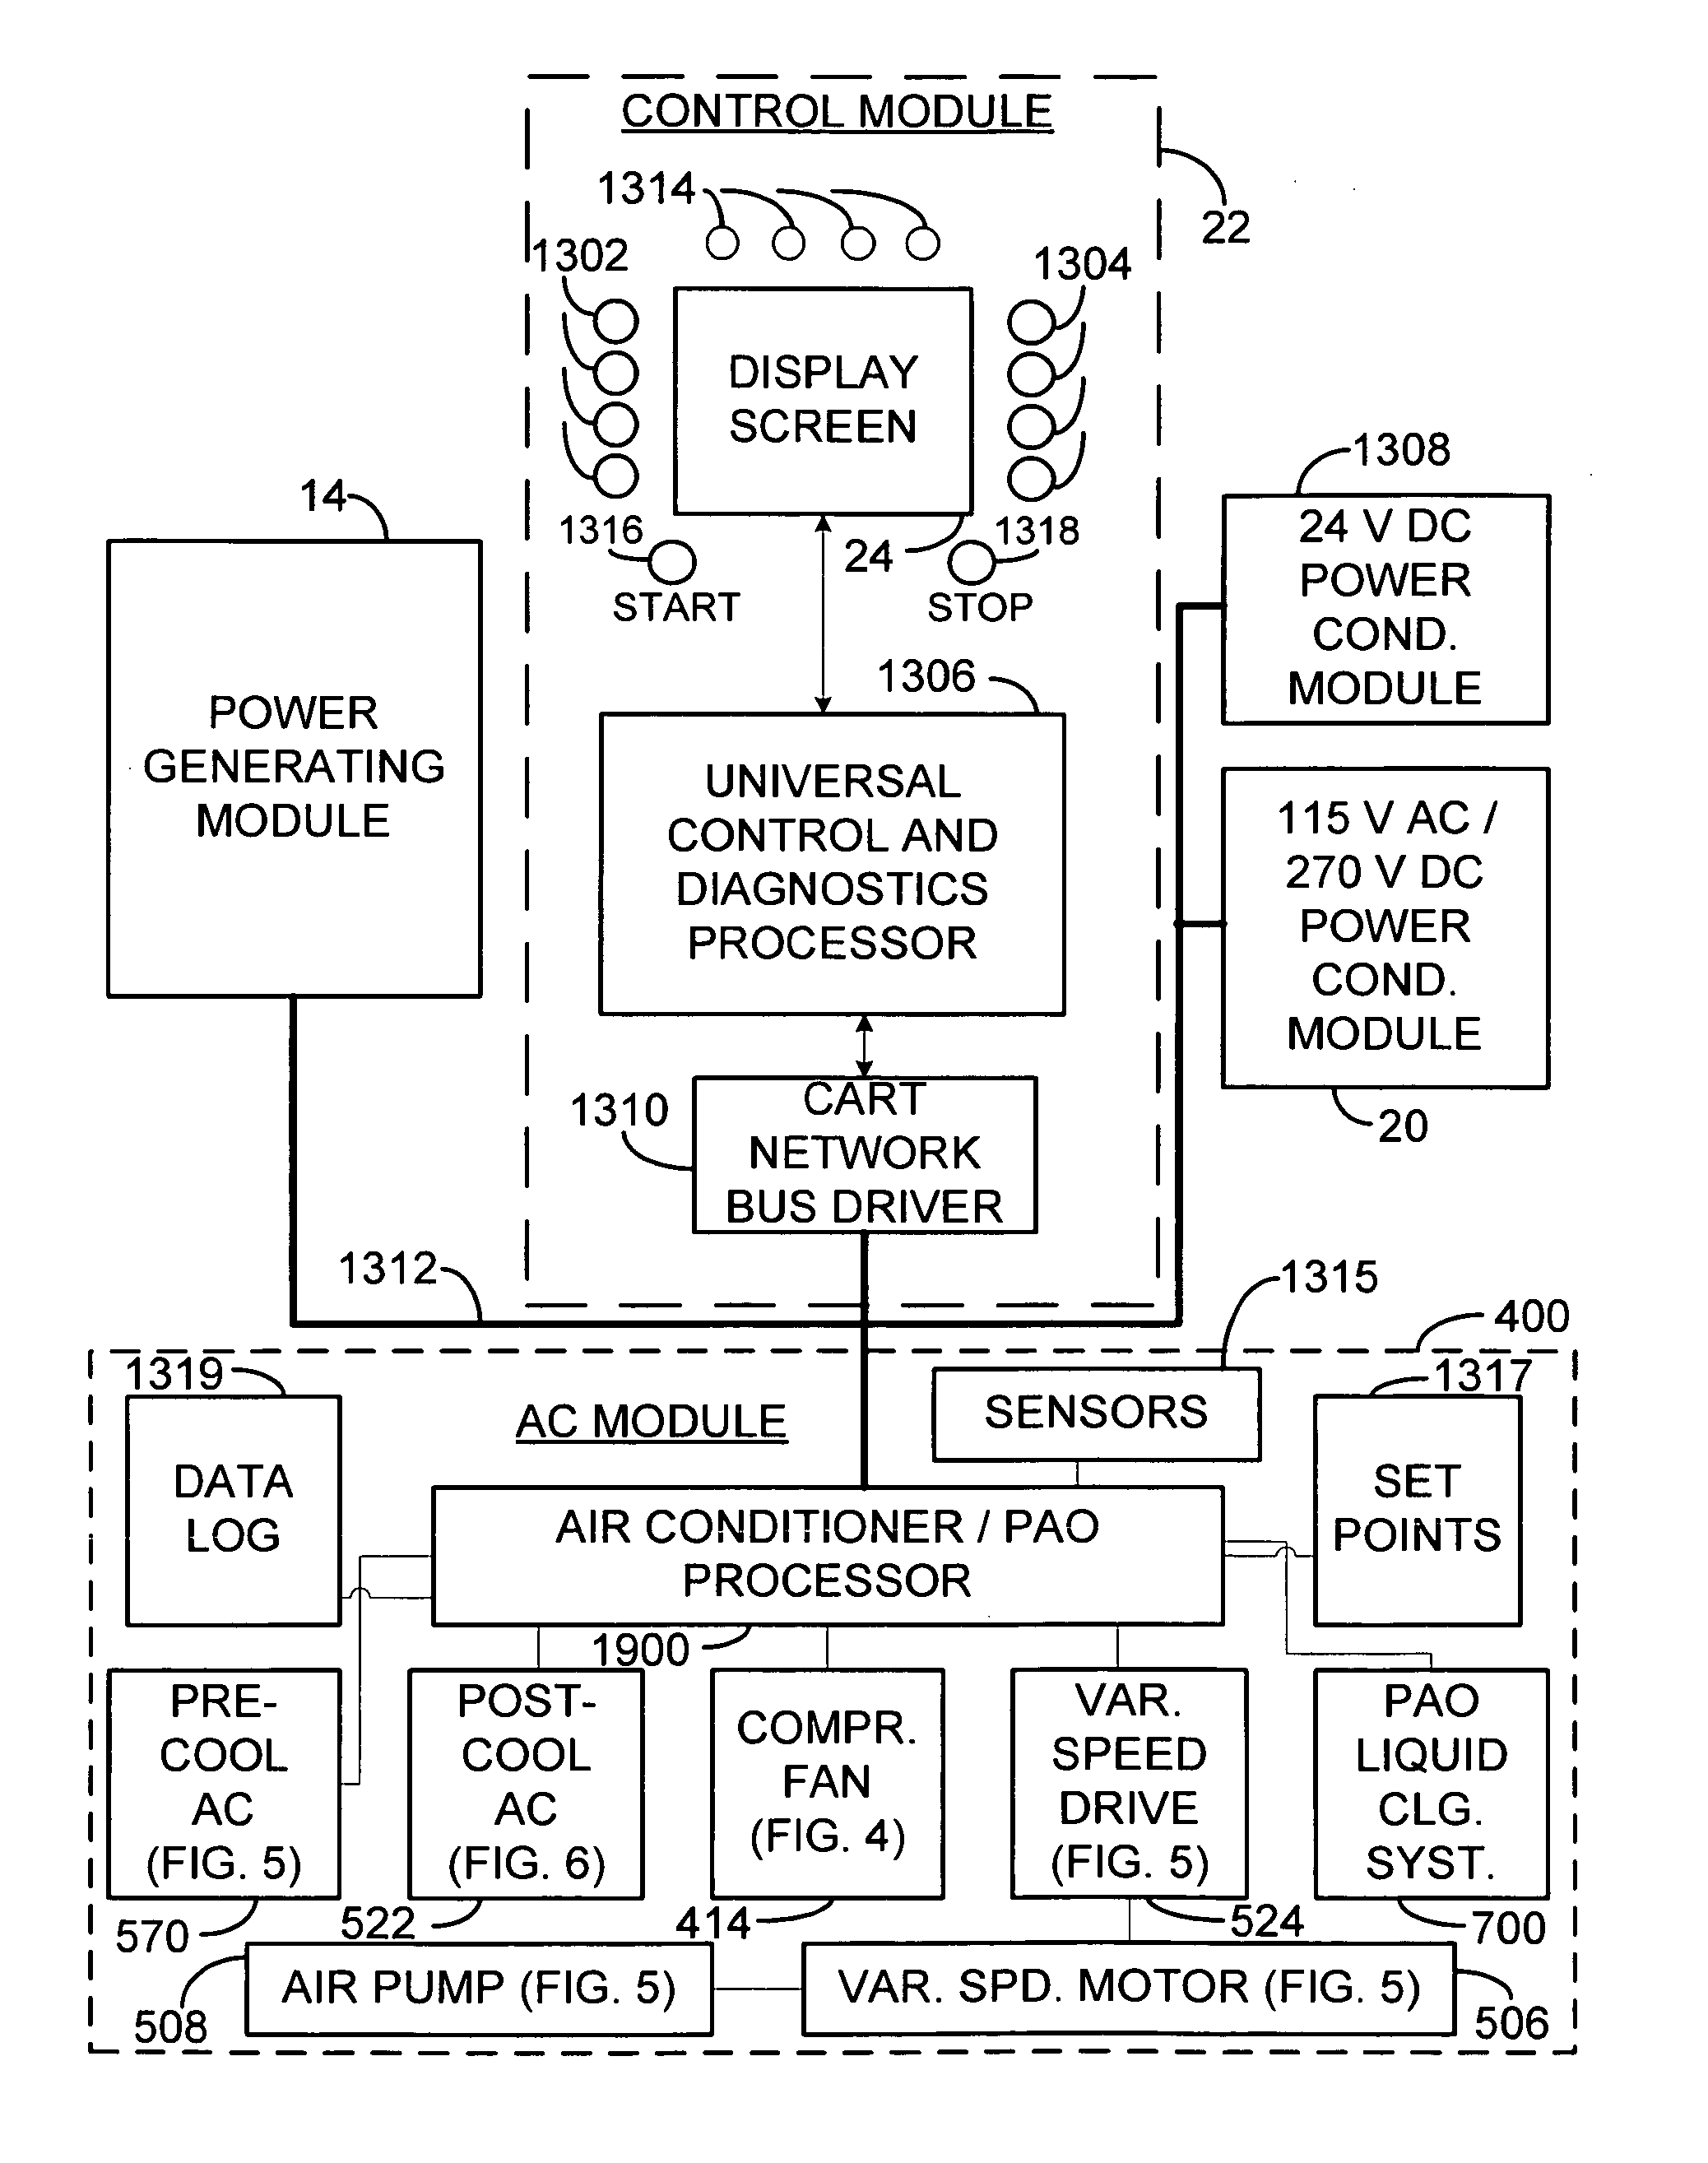 Maintenance and control system for ground support equipment